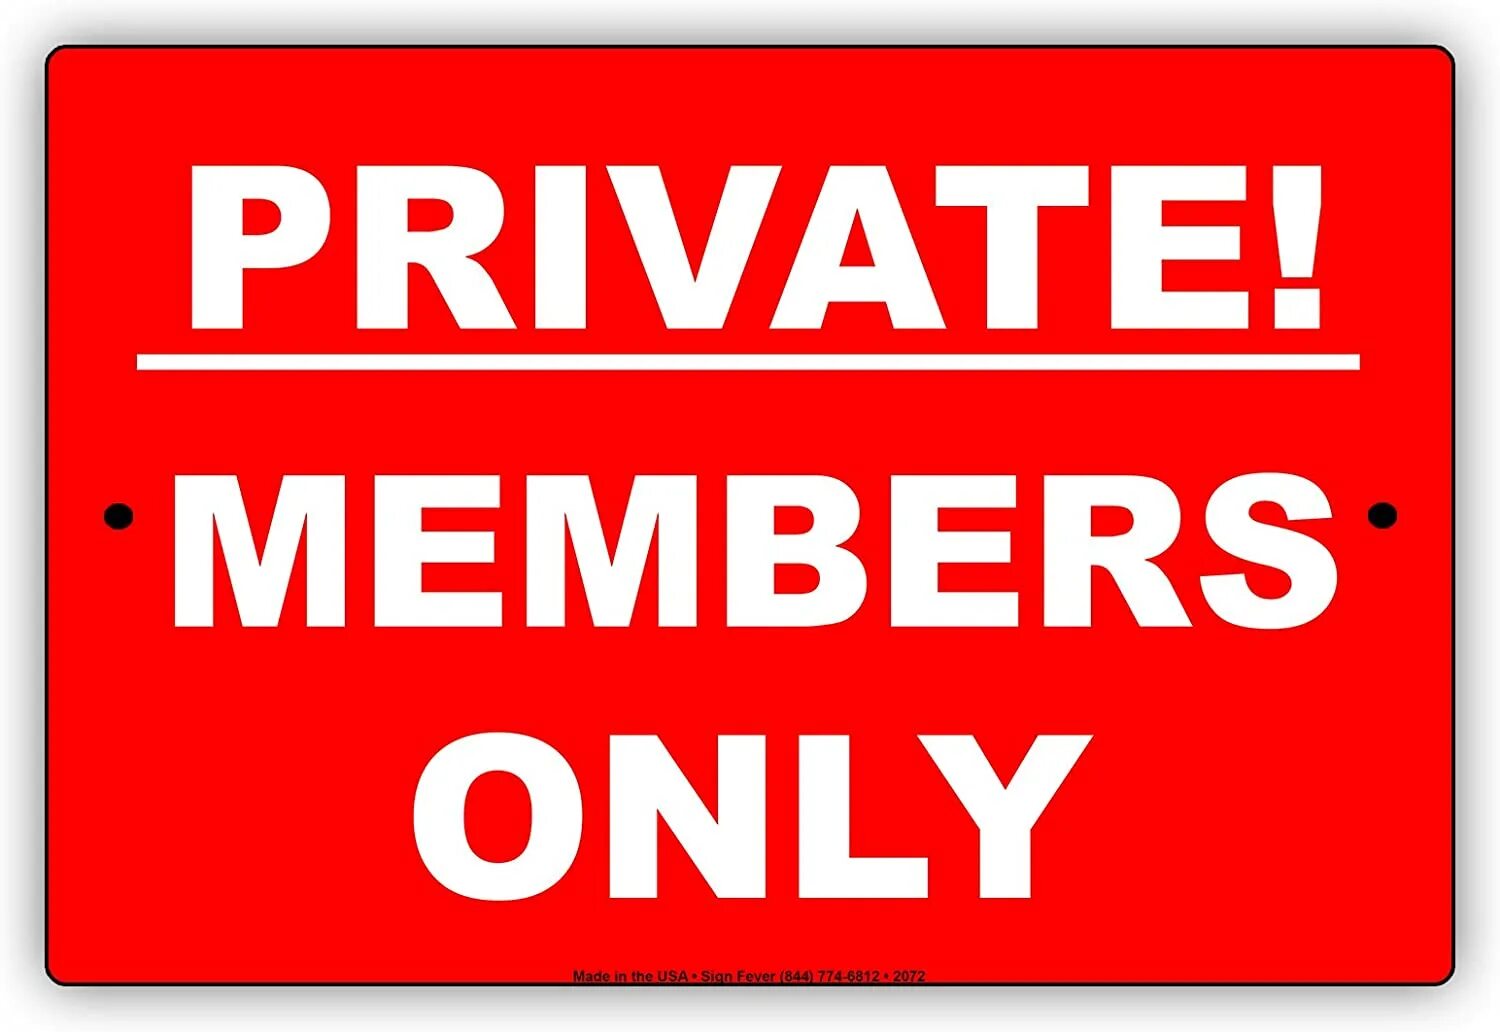 Out private. Онли Проперти. Members only.